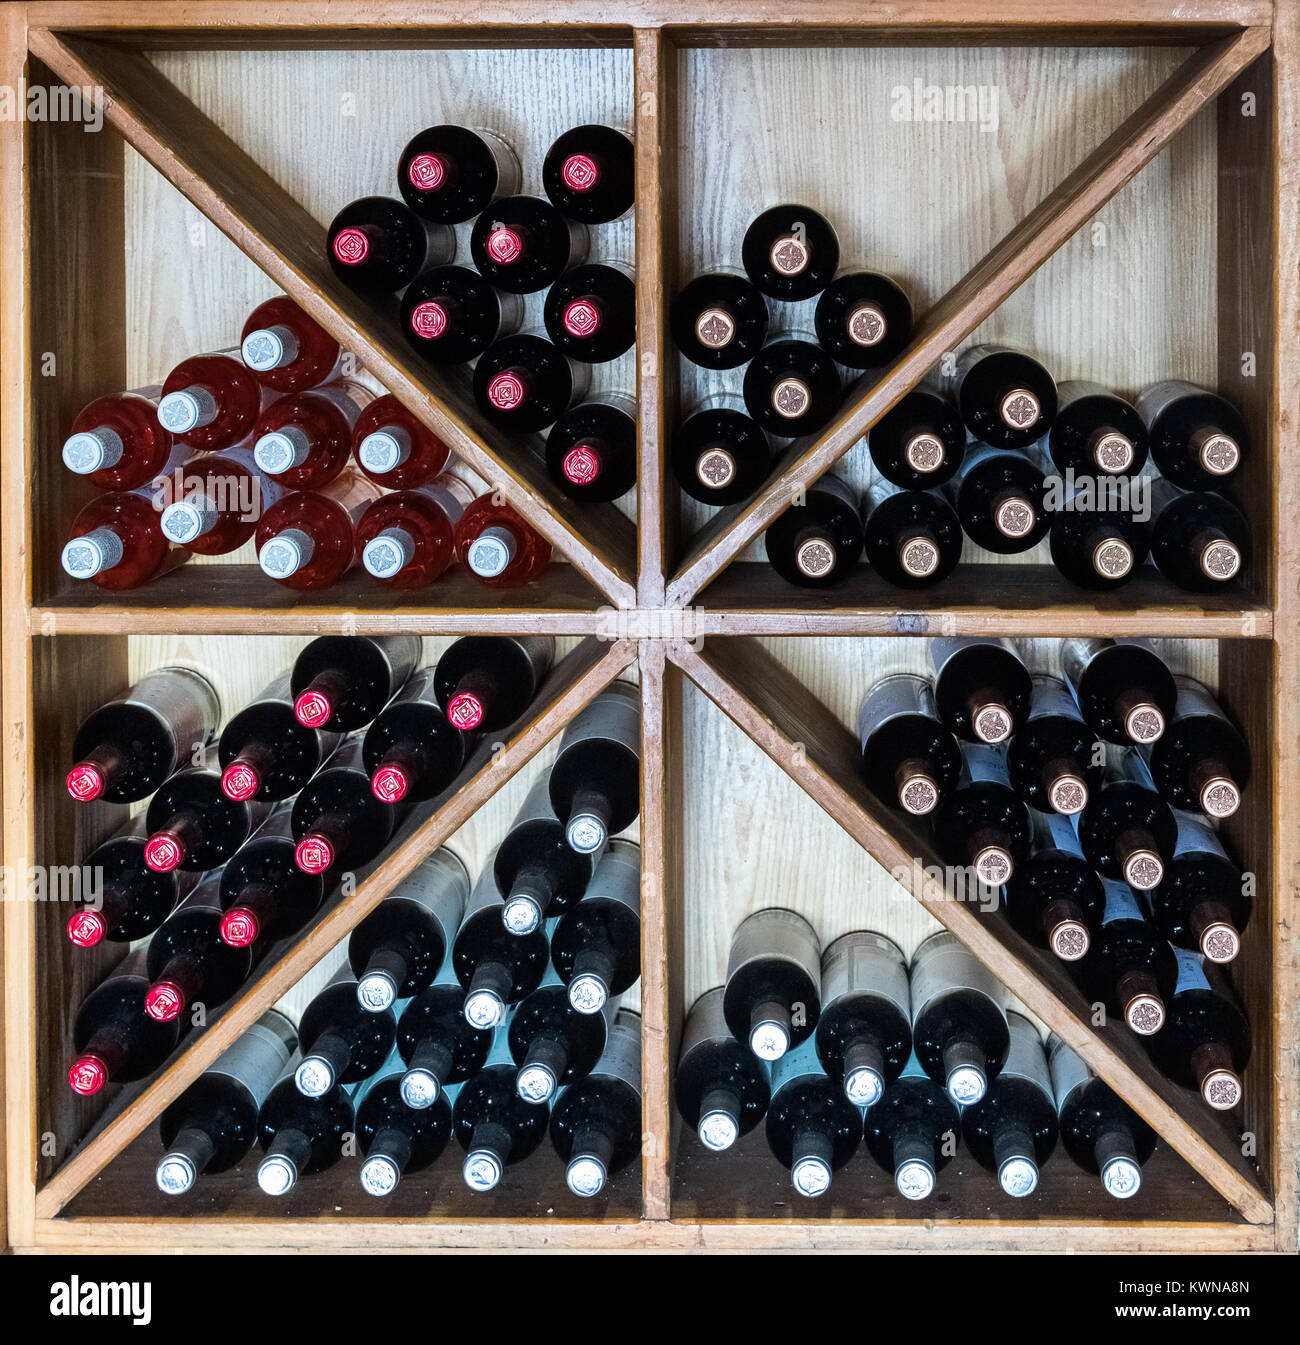 Puerto de Mogan, Gran Canaria in Spain - December 16, 2017: wine bottles stored in a rack at a restaurant, square image Stock Photo